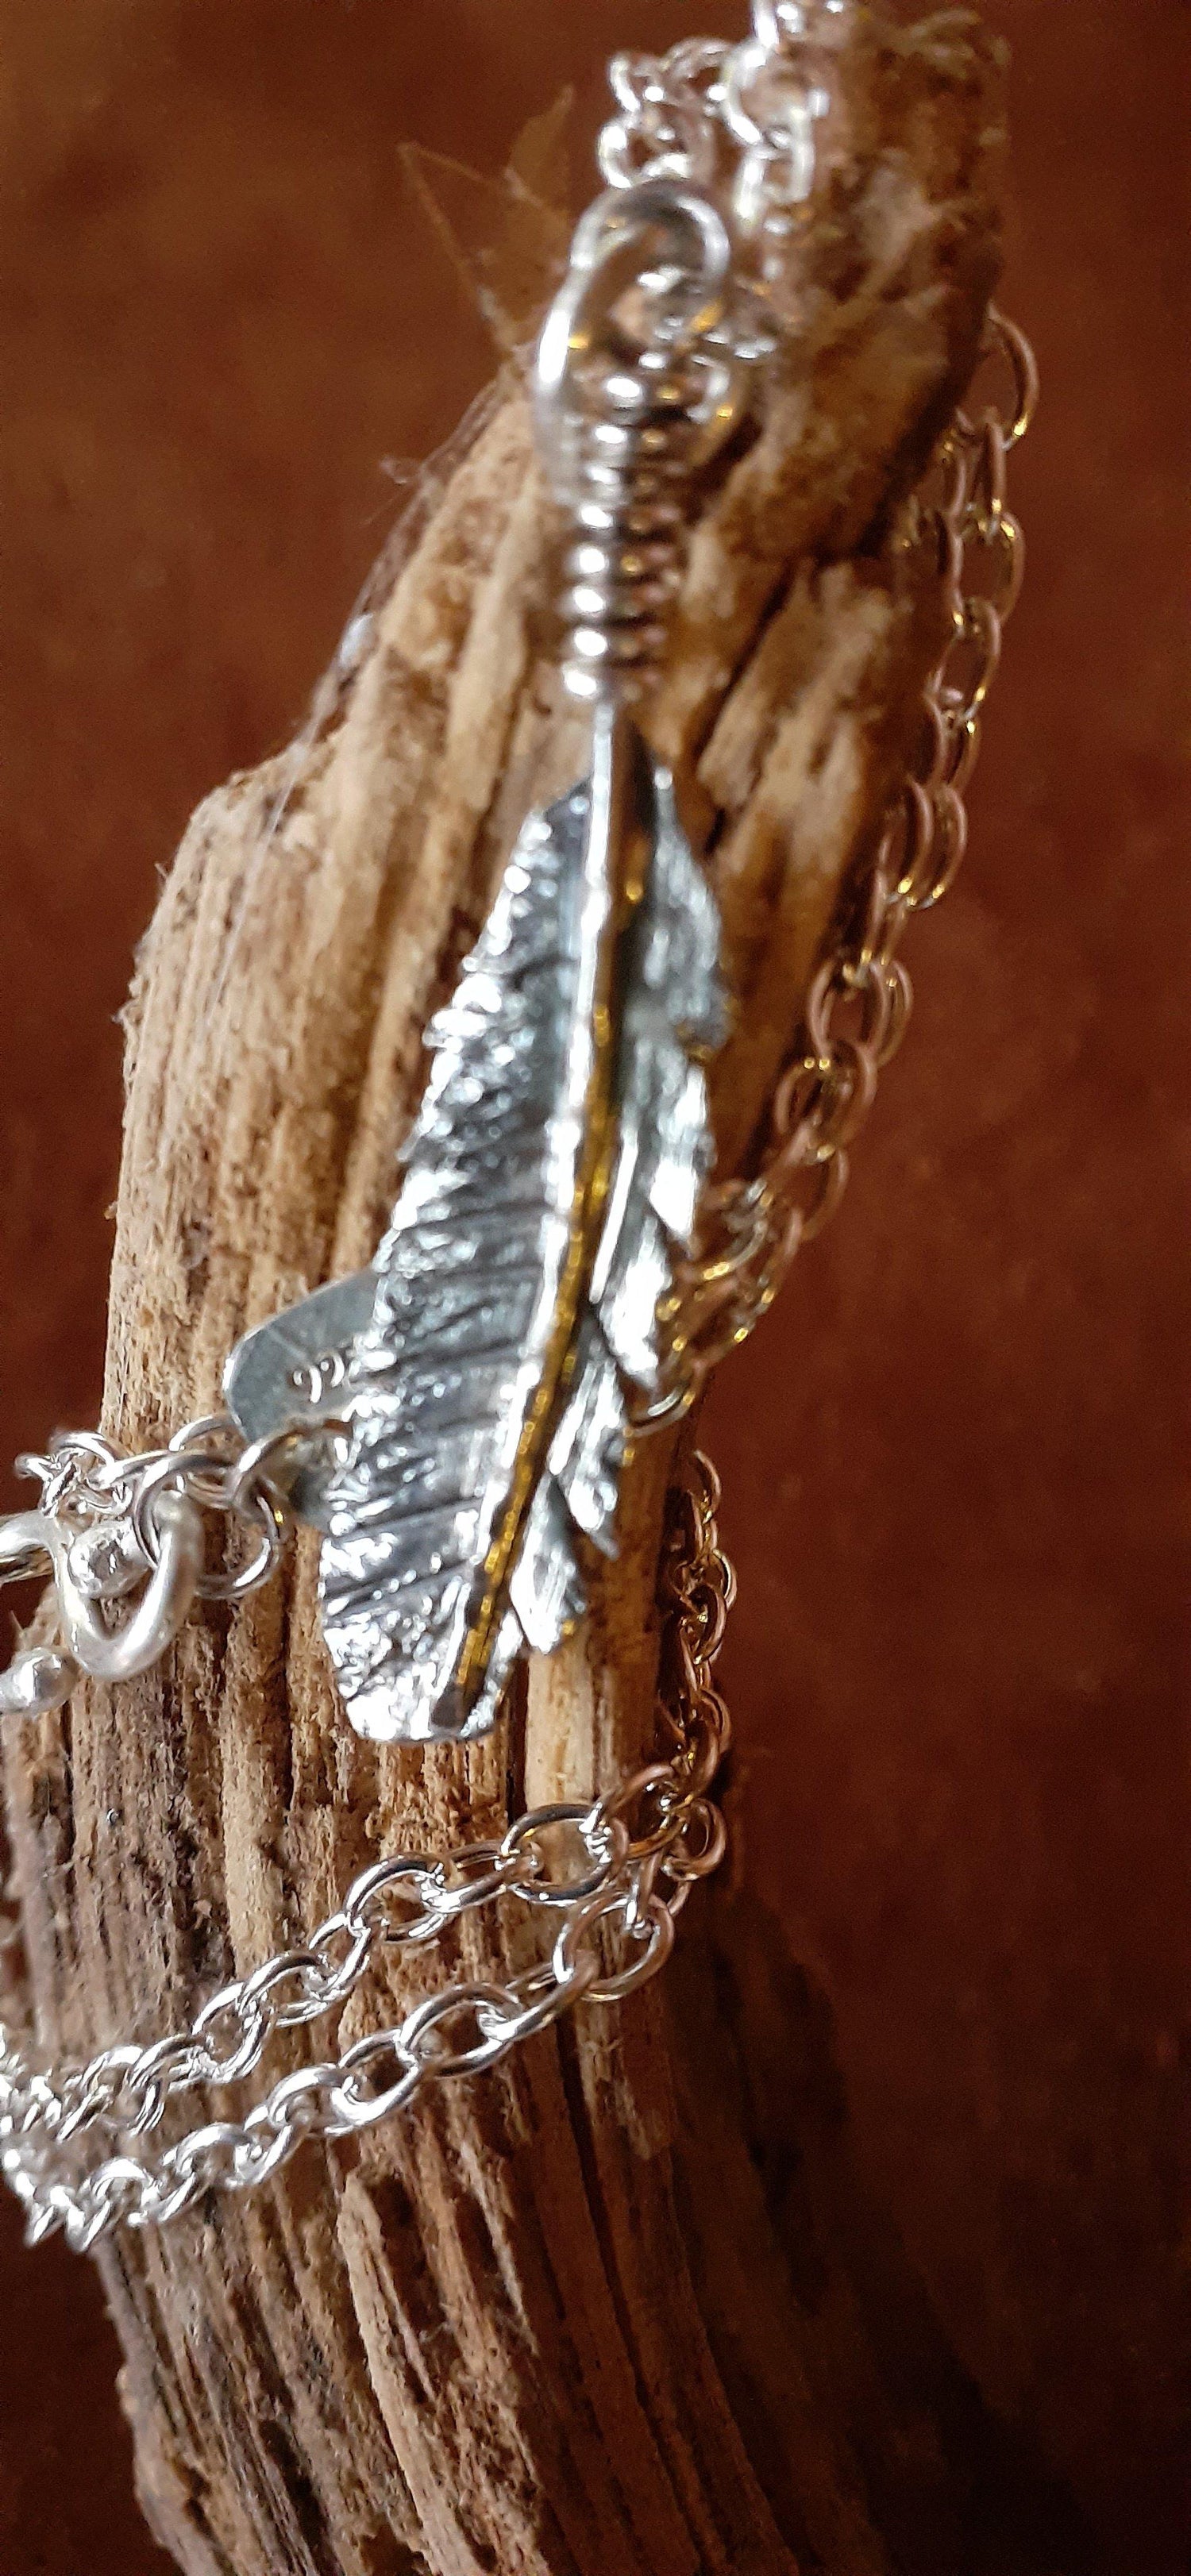 Sterling Feather Necklace - WarmRainyDay